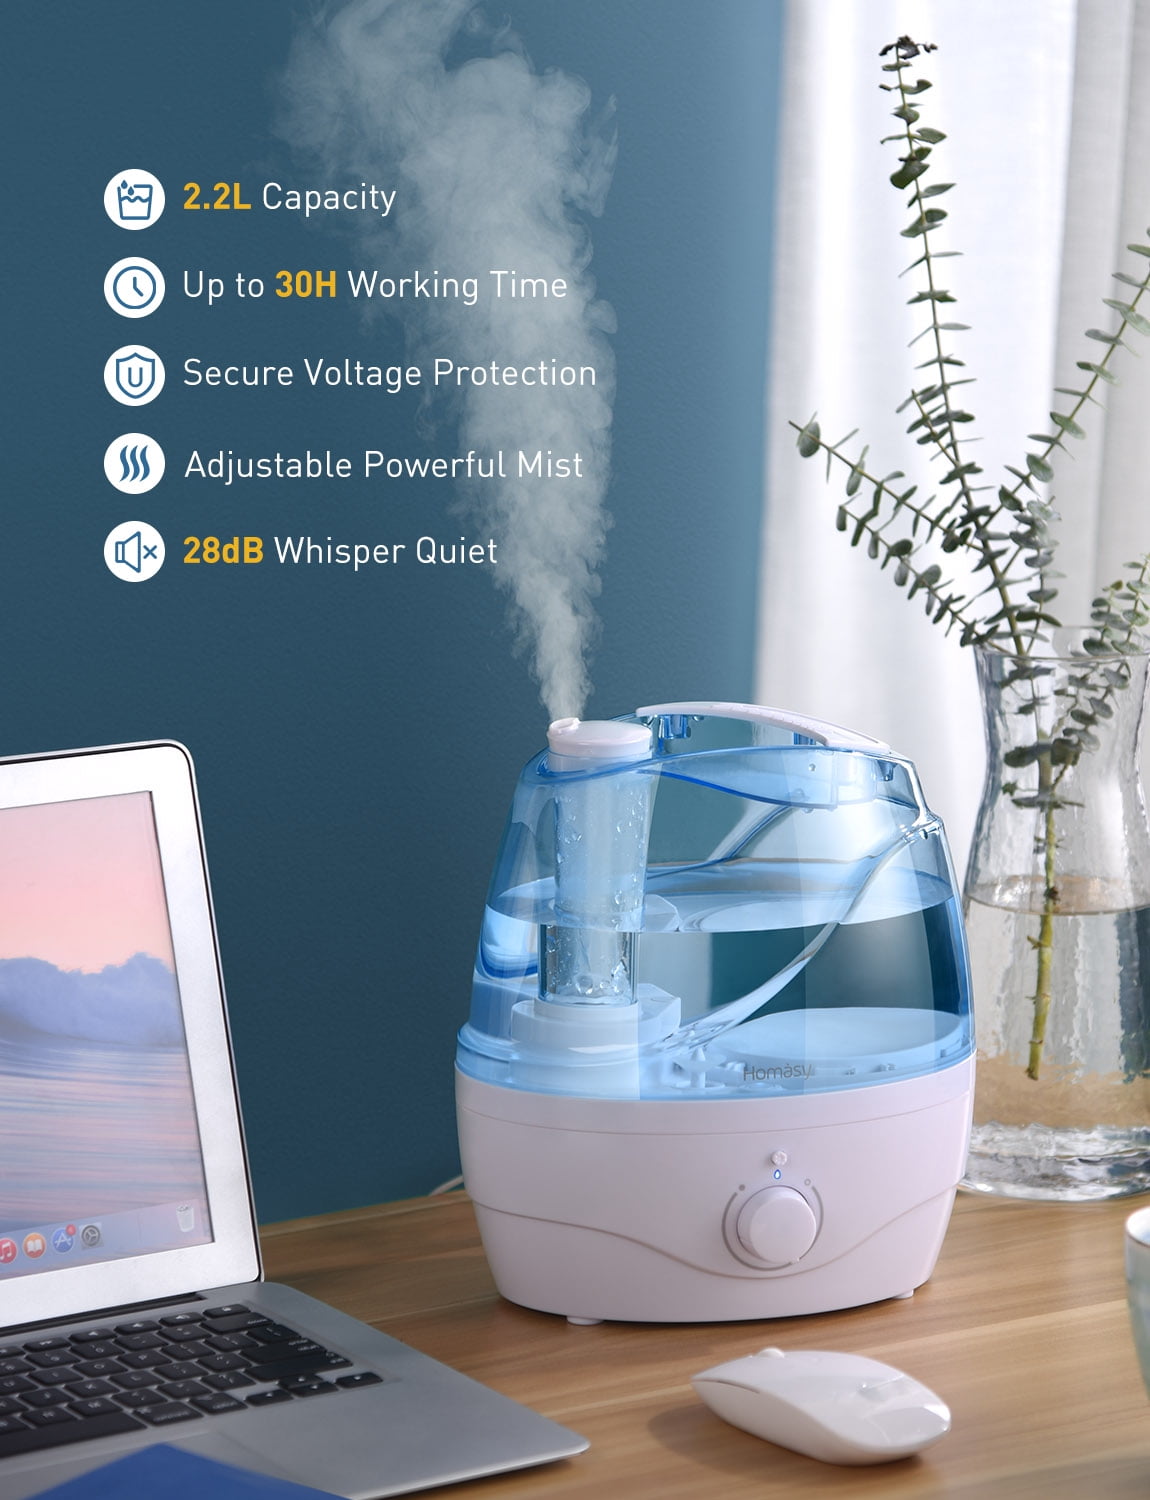 Auto Shut-Off- Lasts Up to 24 Hours 2.2L Cool Mist Ultrasonic Humidifiers for Large Bedroom Baby Homasy Victsing Upgraded Humidifier Home Premium Air Humidifying Vaporizer for Whisper-Quiet 